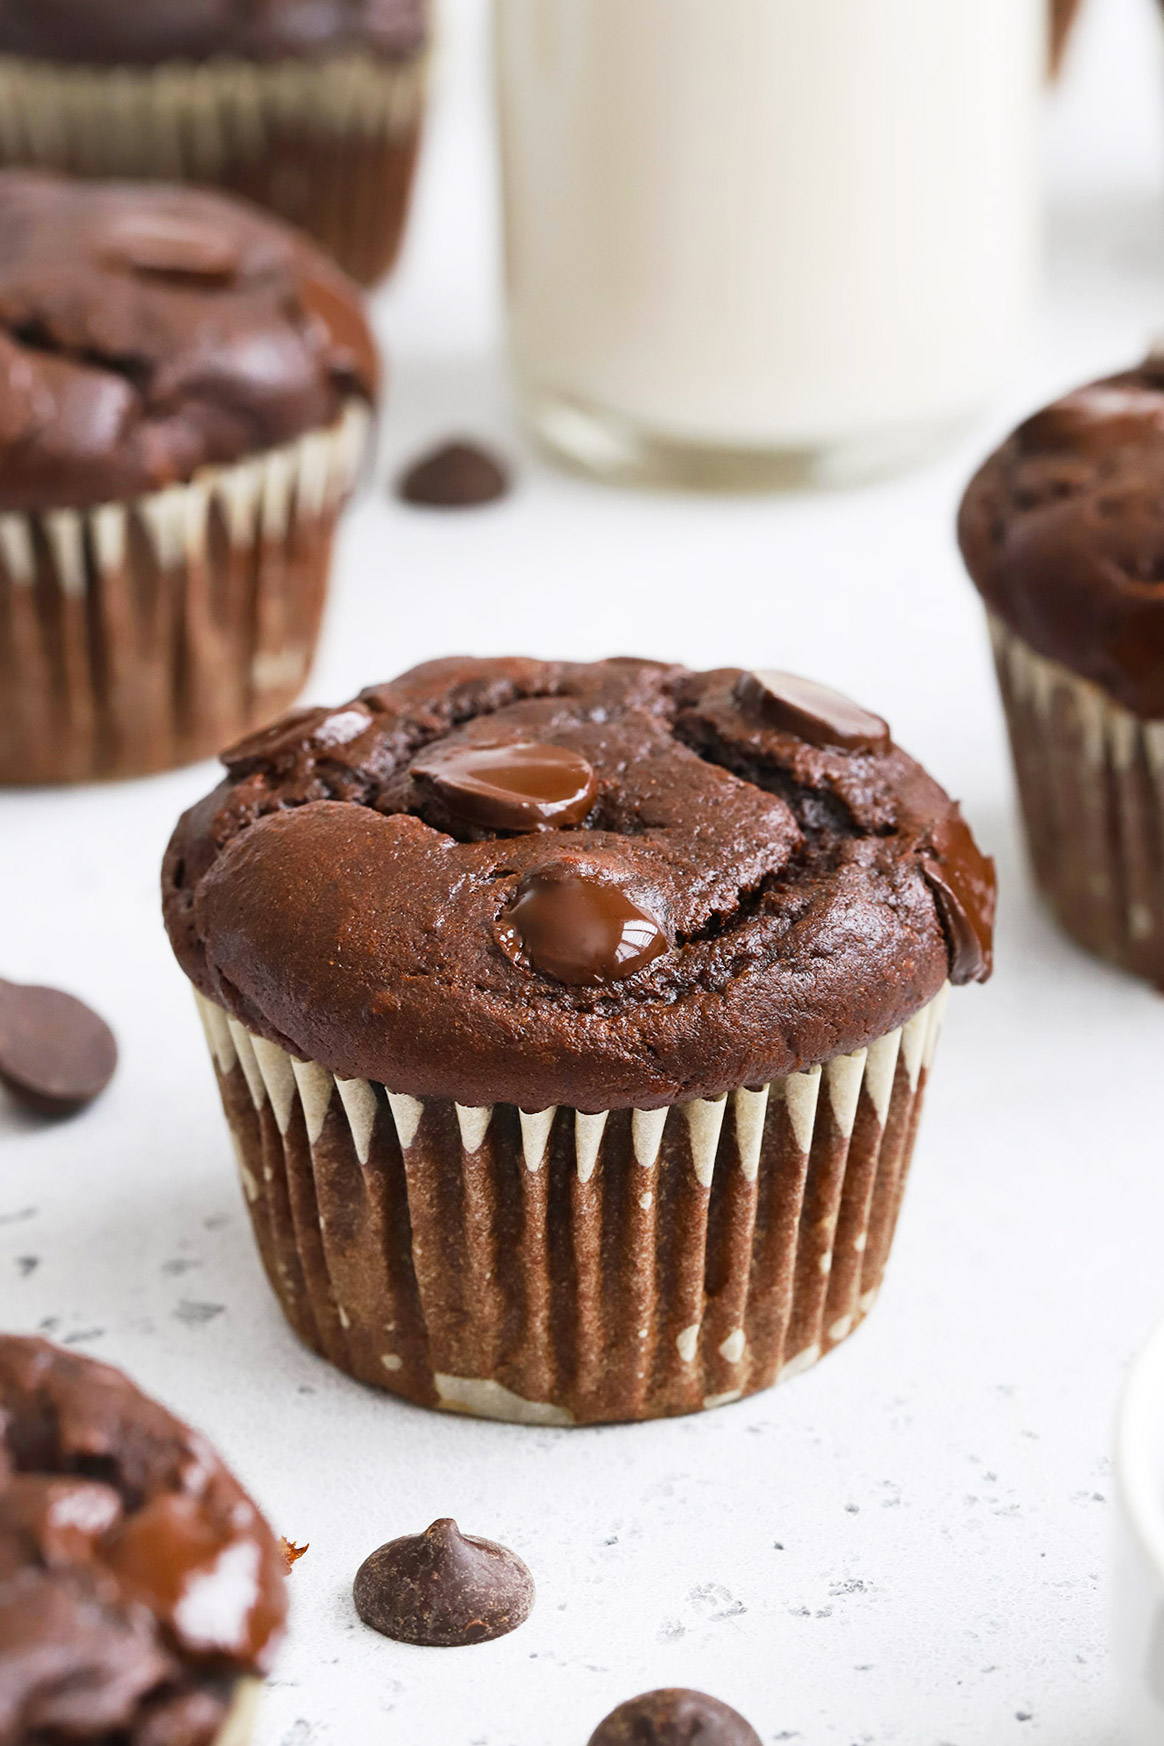 Close up view of a gluten-free chocolate banana muffin with chocolate chips